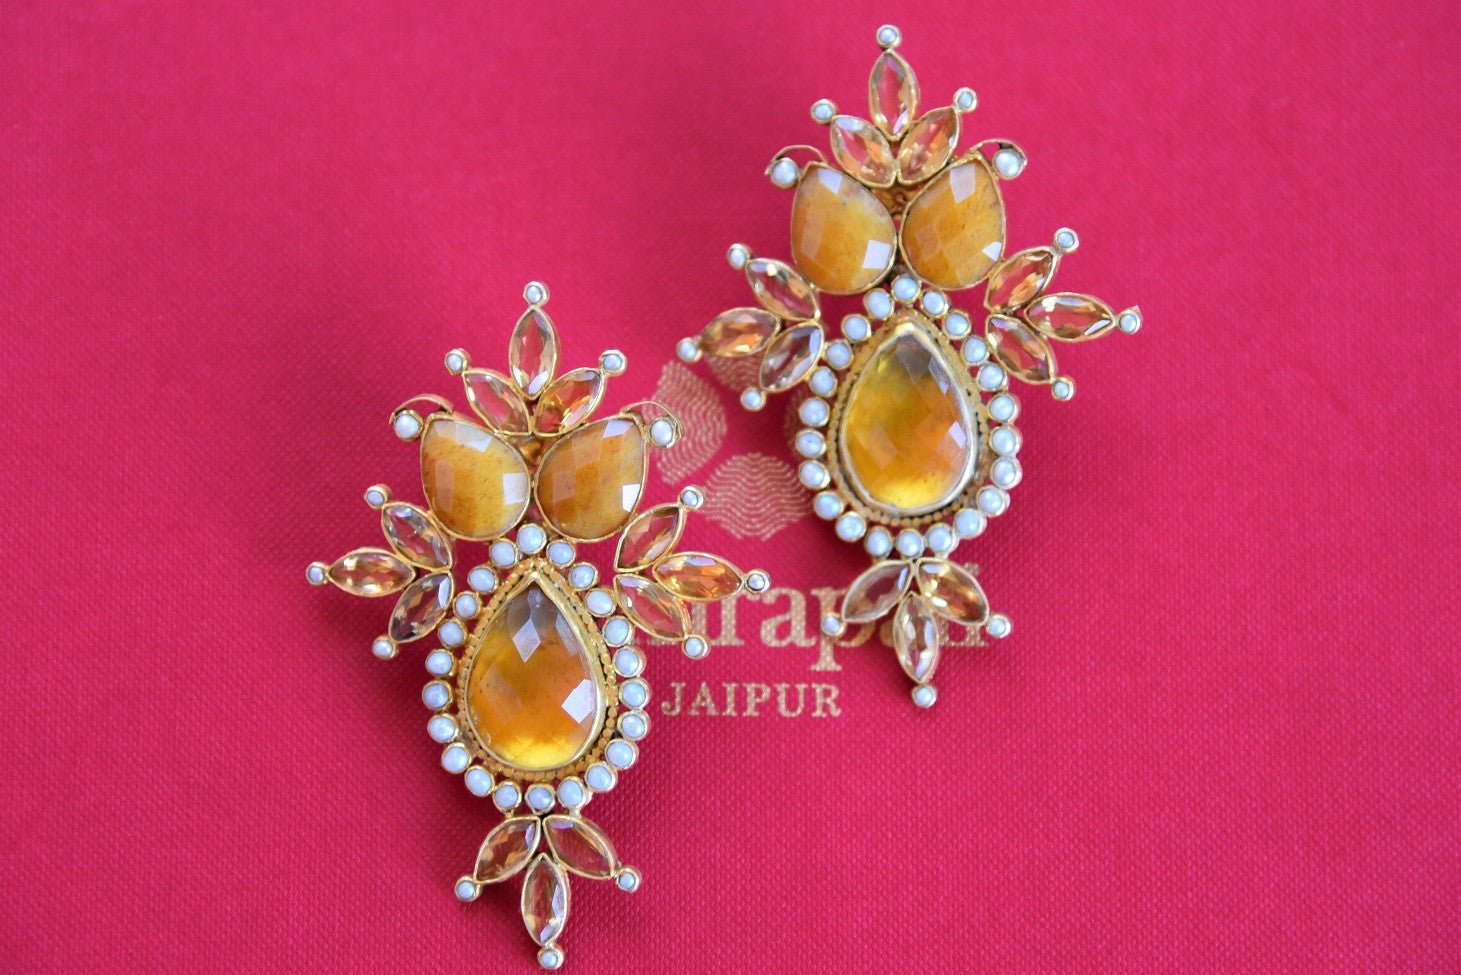 Ethnic Earring with yellow glass and white pearls detailing on gold plated silver.-Fashion earring